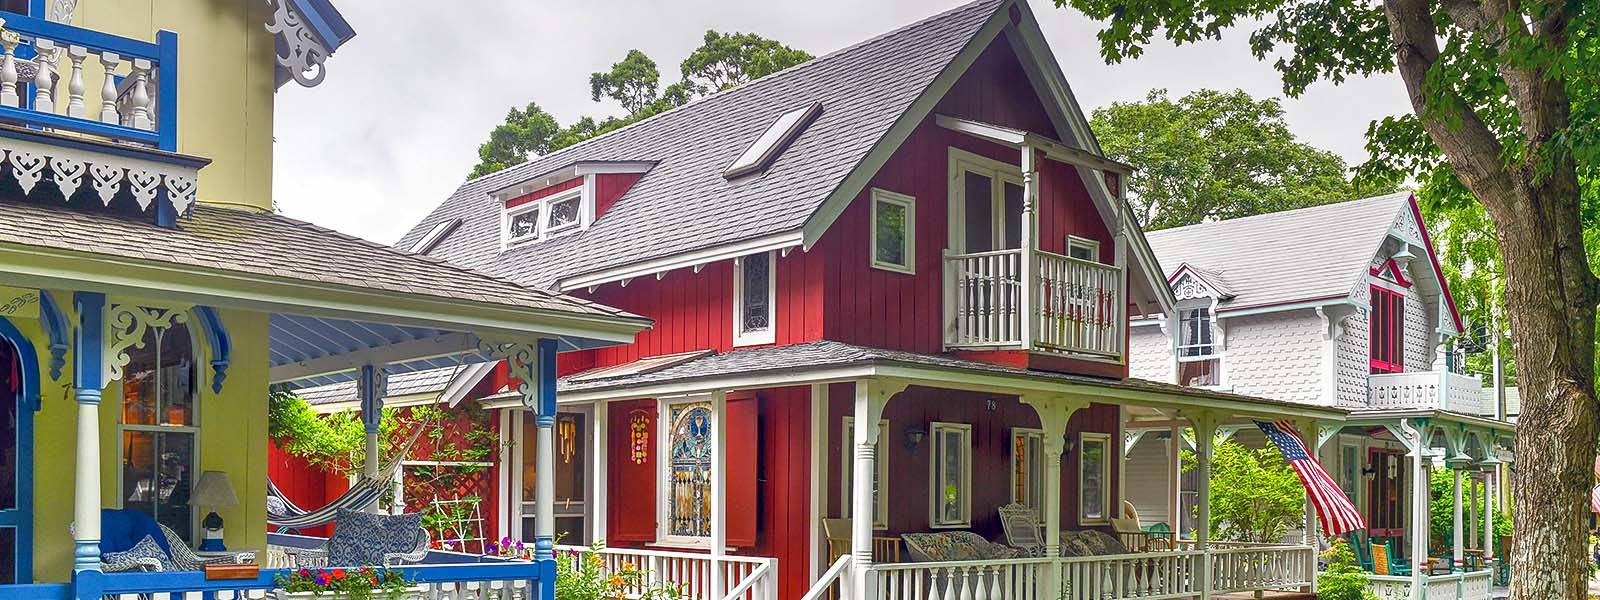 What to Do on MV - Oak Bluffs Gingerbread Houses